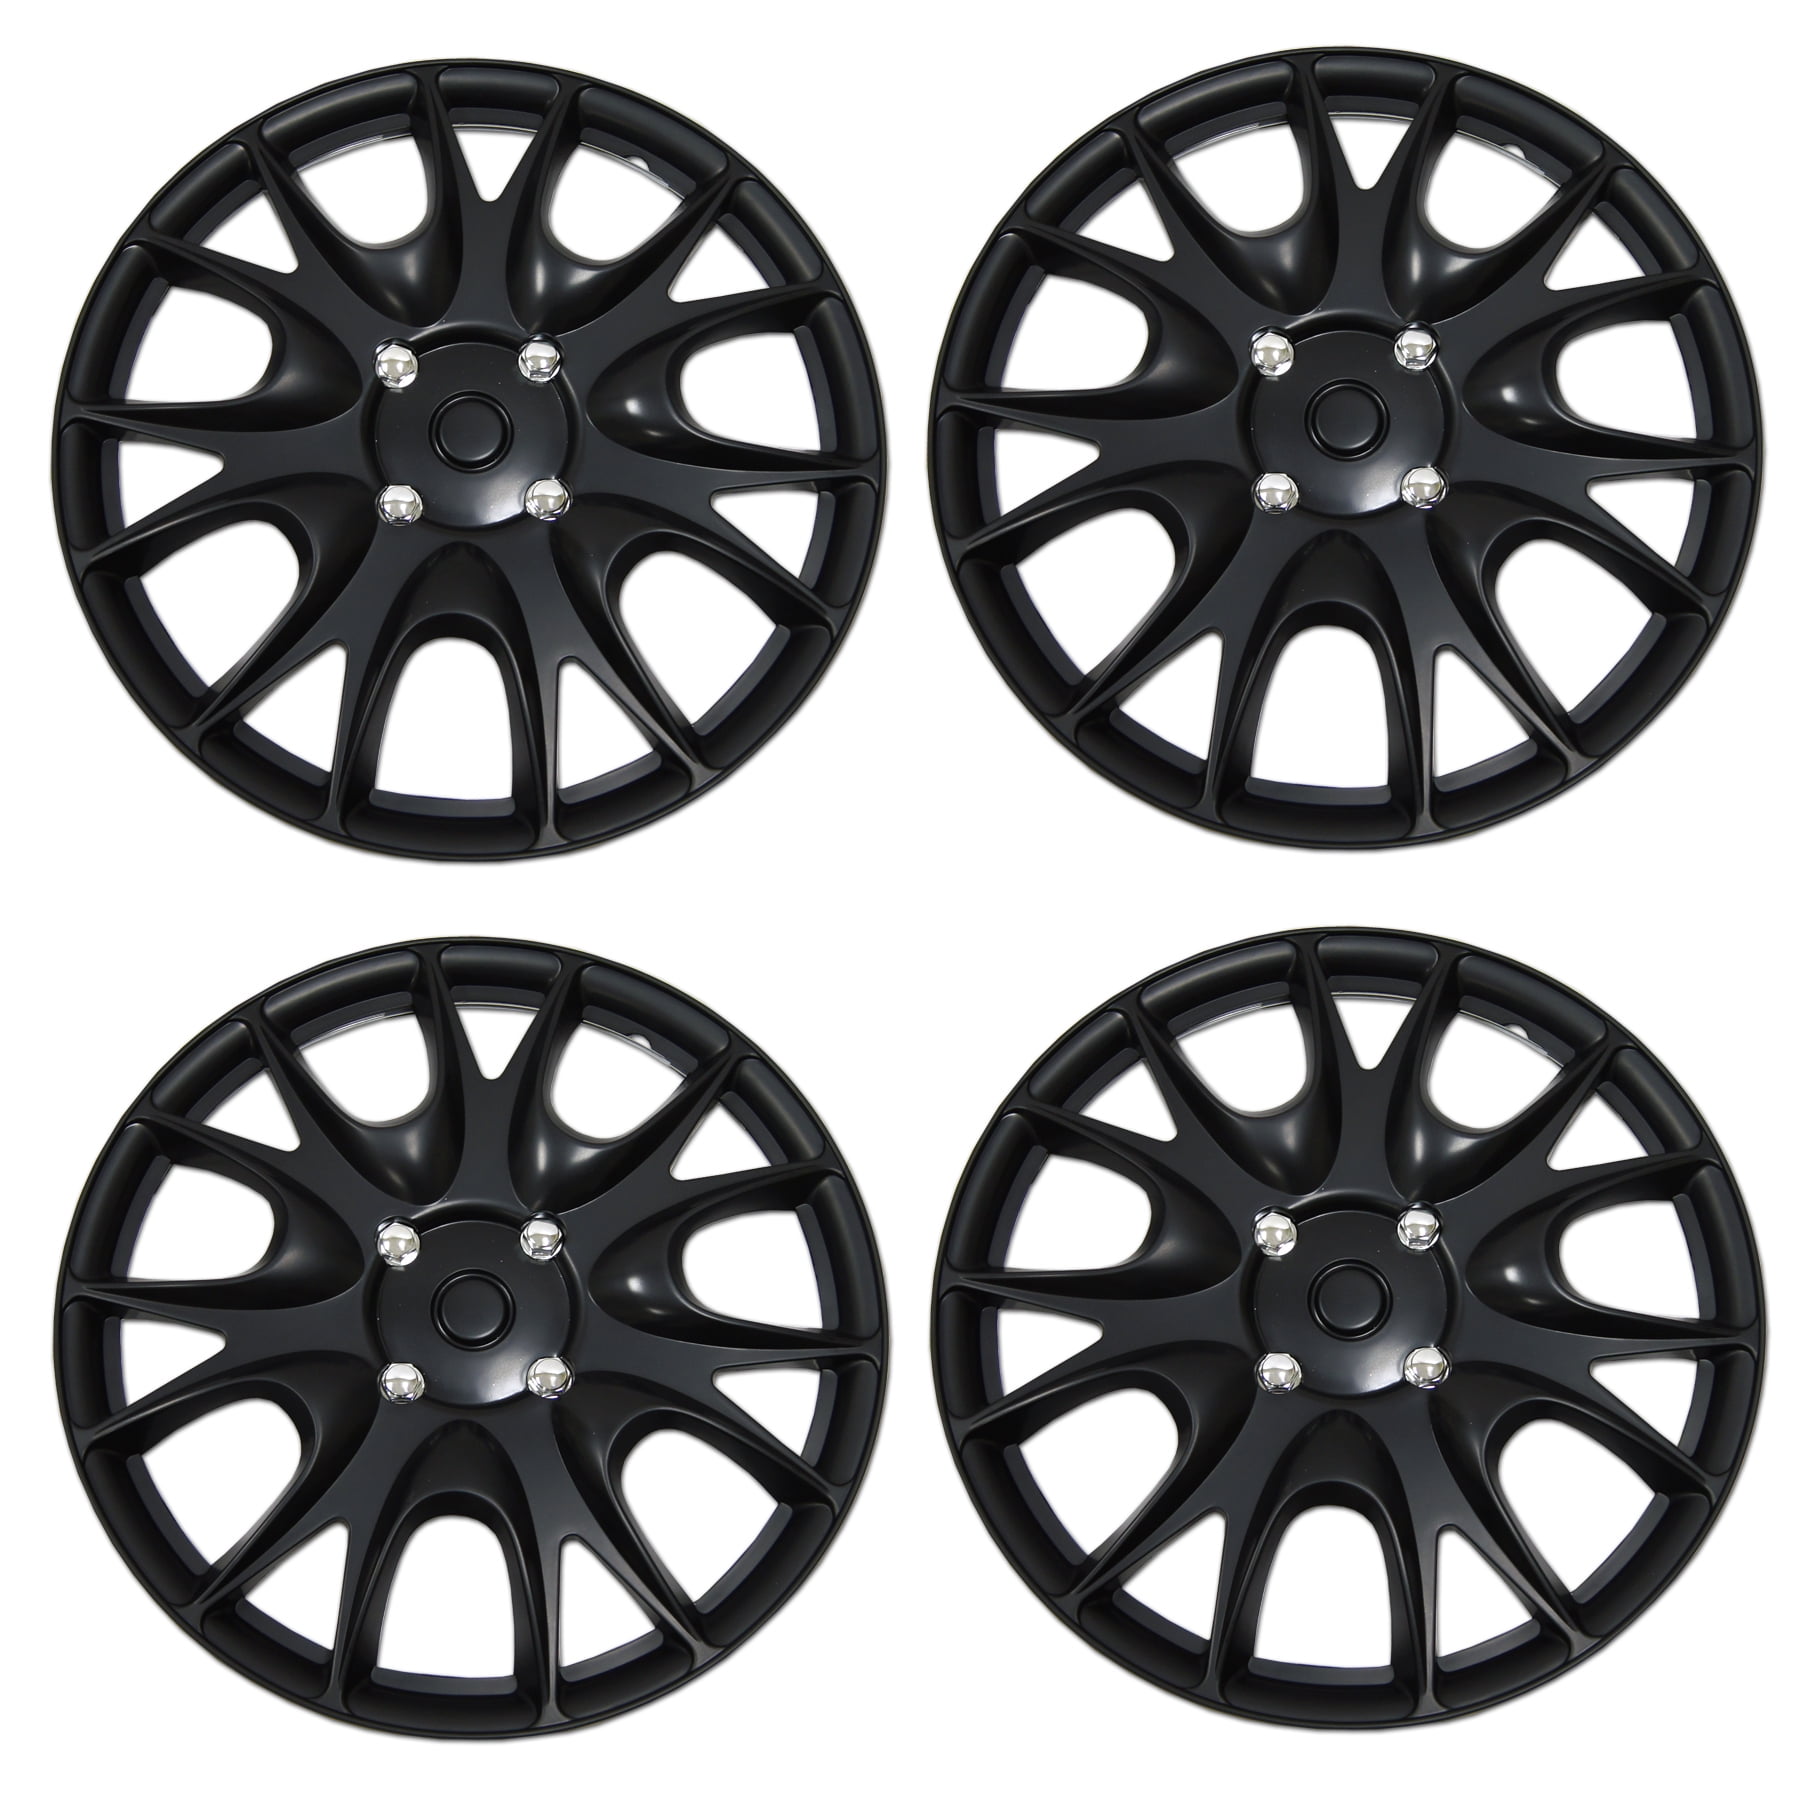 Universal Aftermarket 14 Black Matte Hub Caps Wheel Covers Set of 4 Cover Trend 